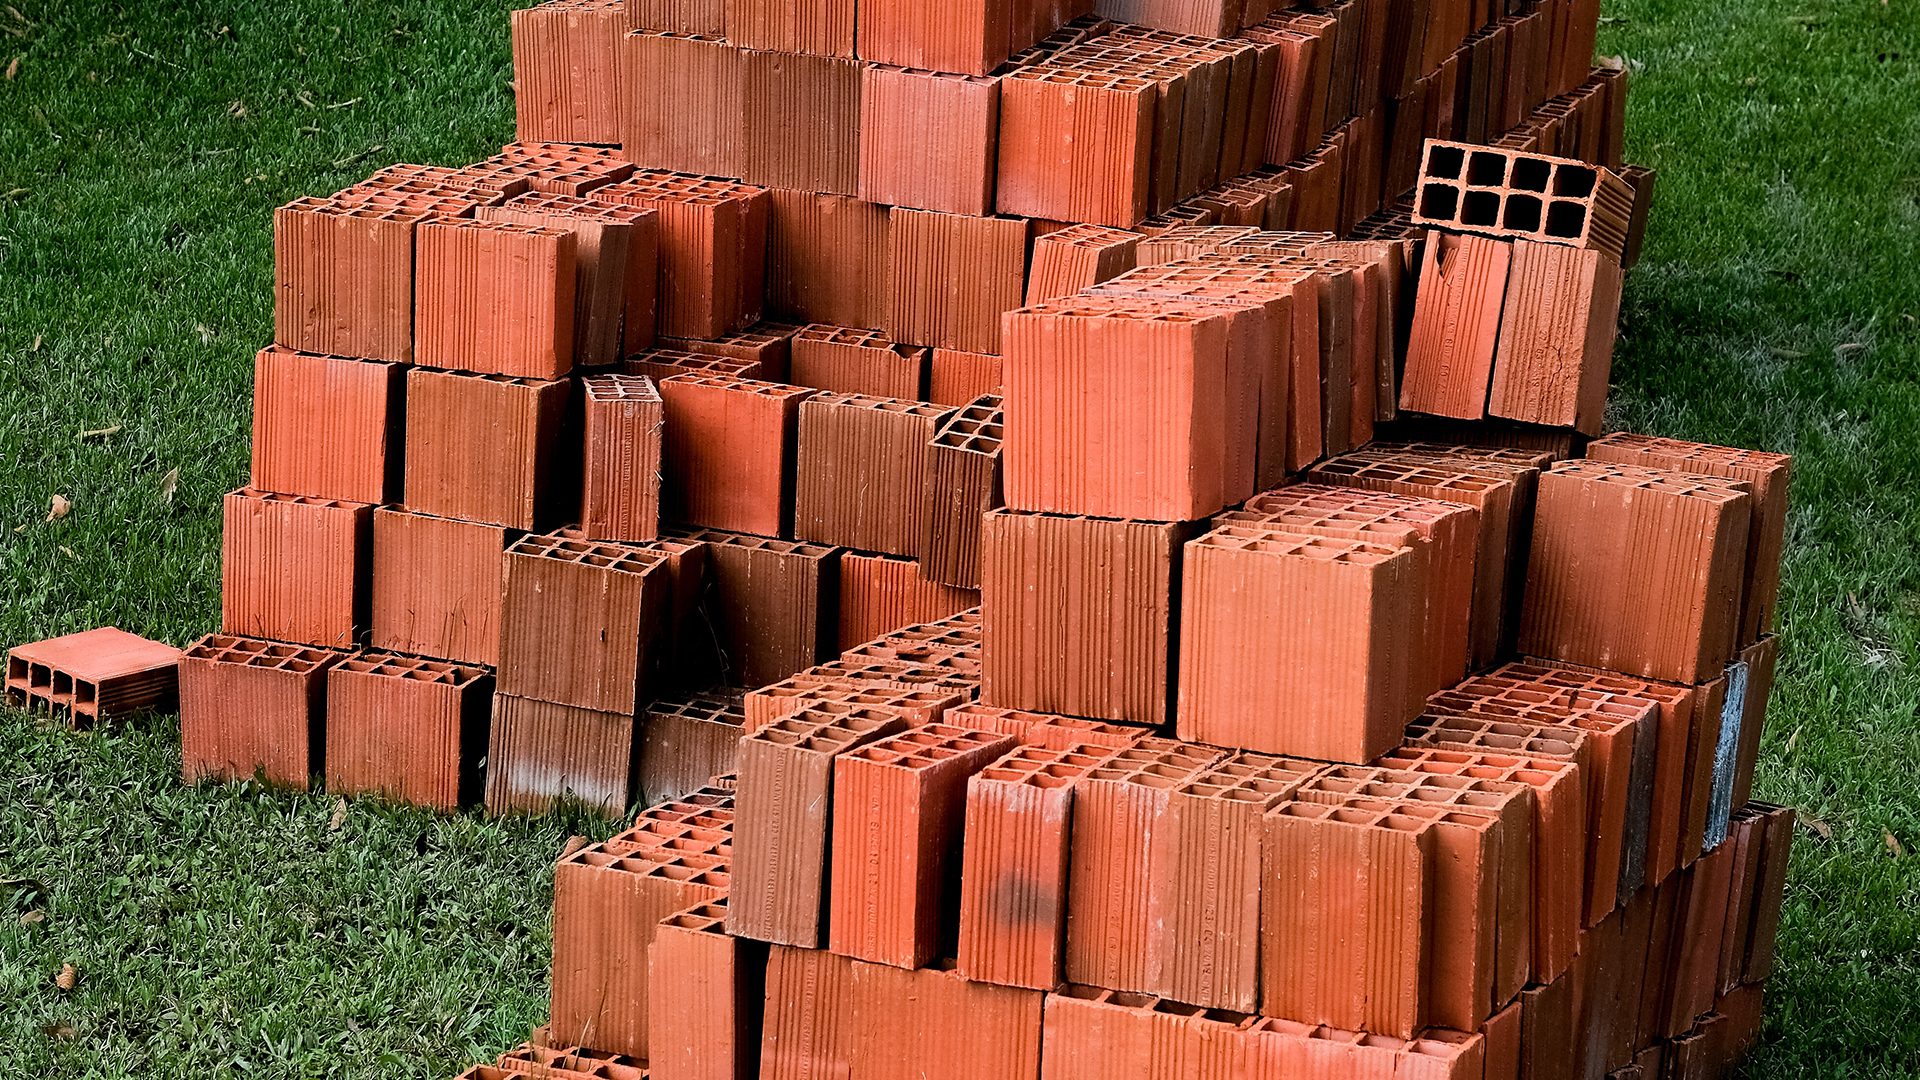 Landscaping Toronto - Stacks of red bricks on a grassy lawn, prepared for bricklaying, some intact and others slightly displaced.